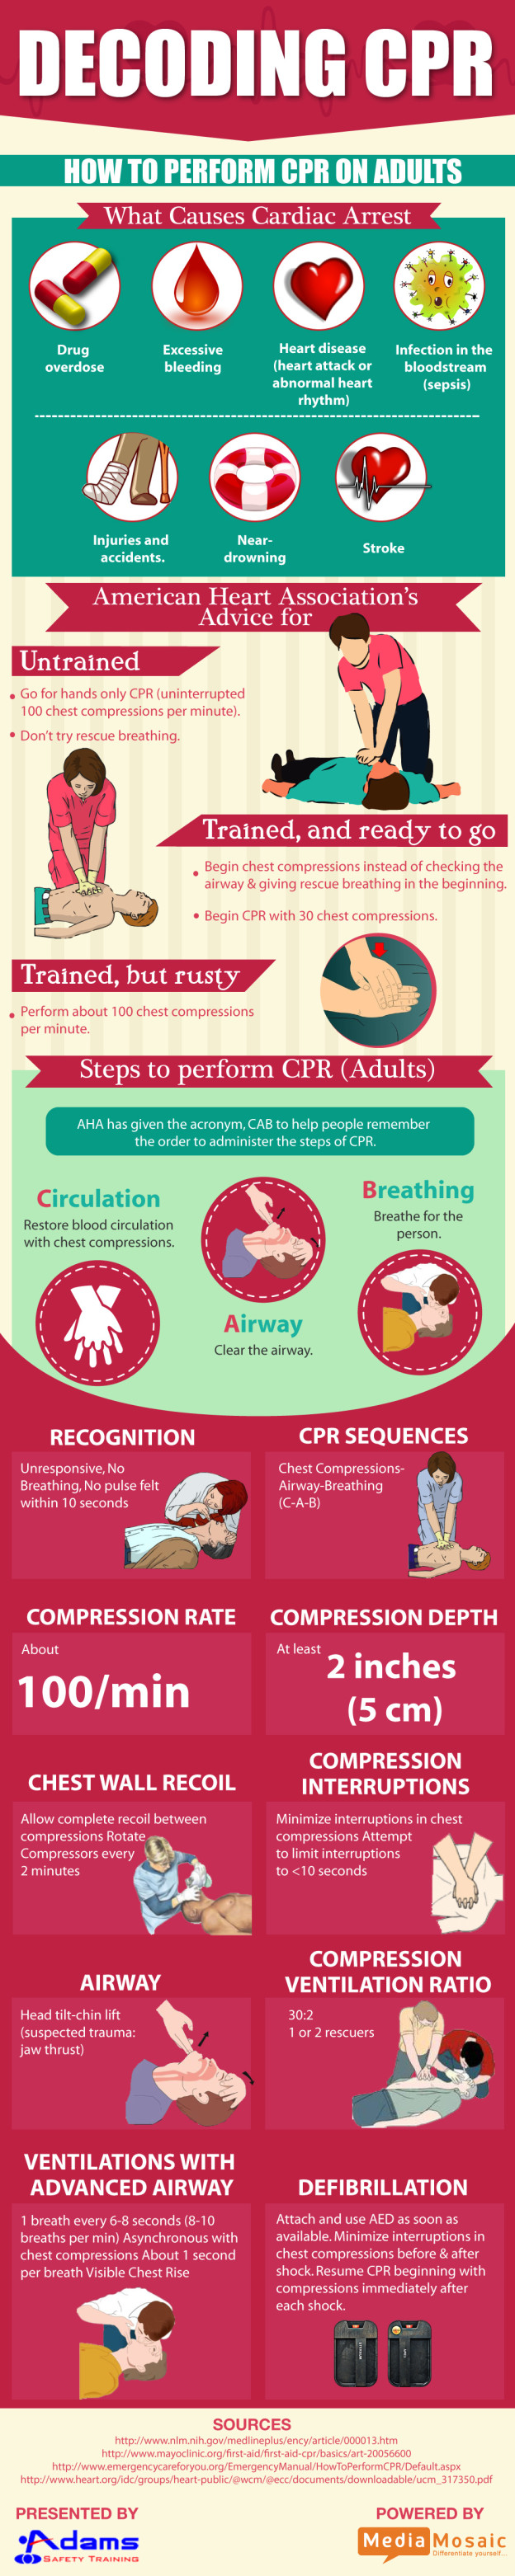 How to Perform CPR on Adults